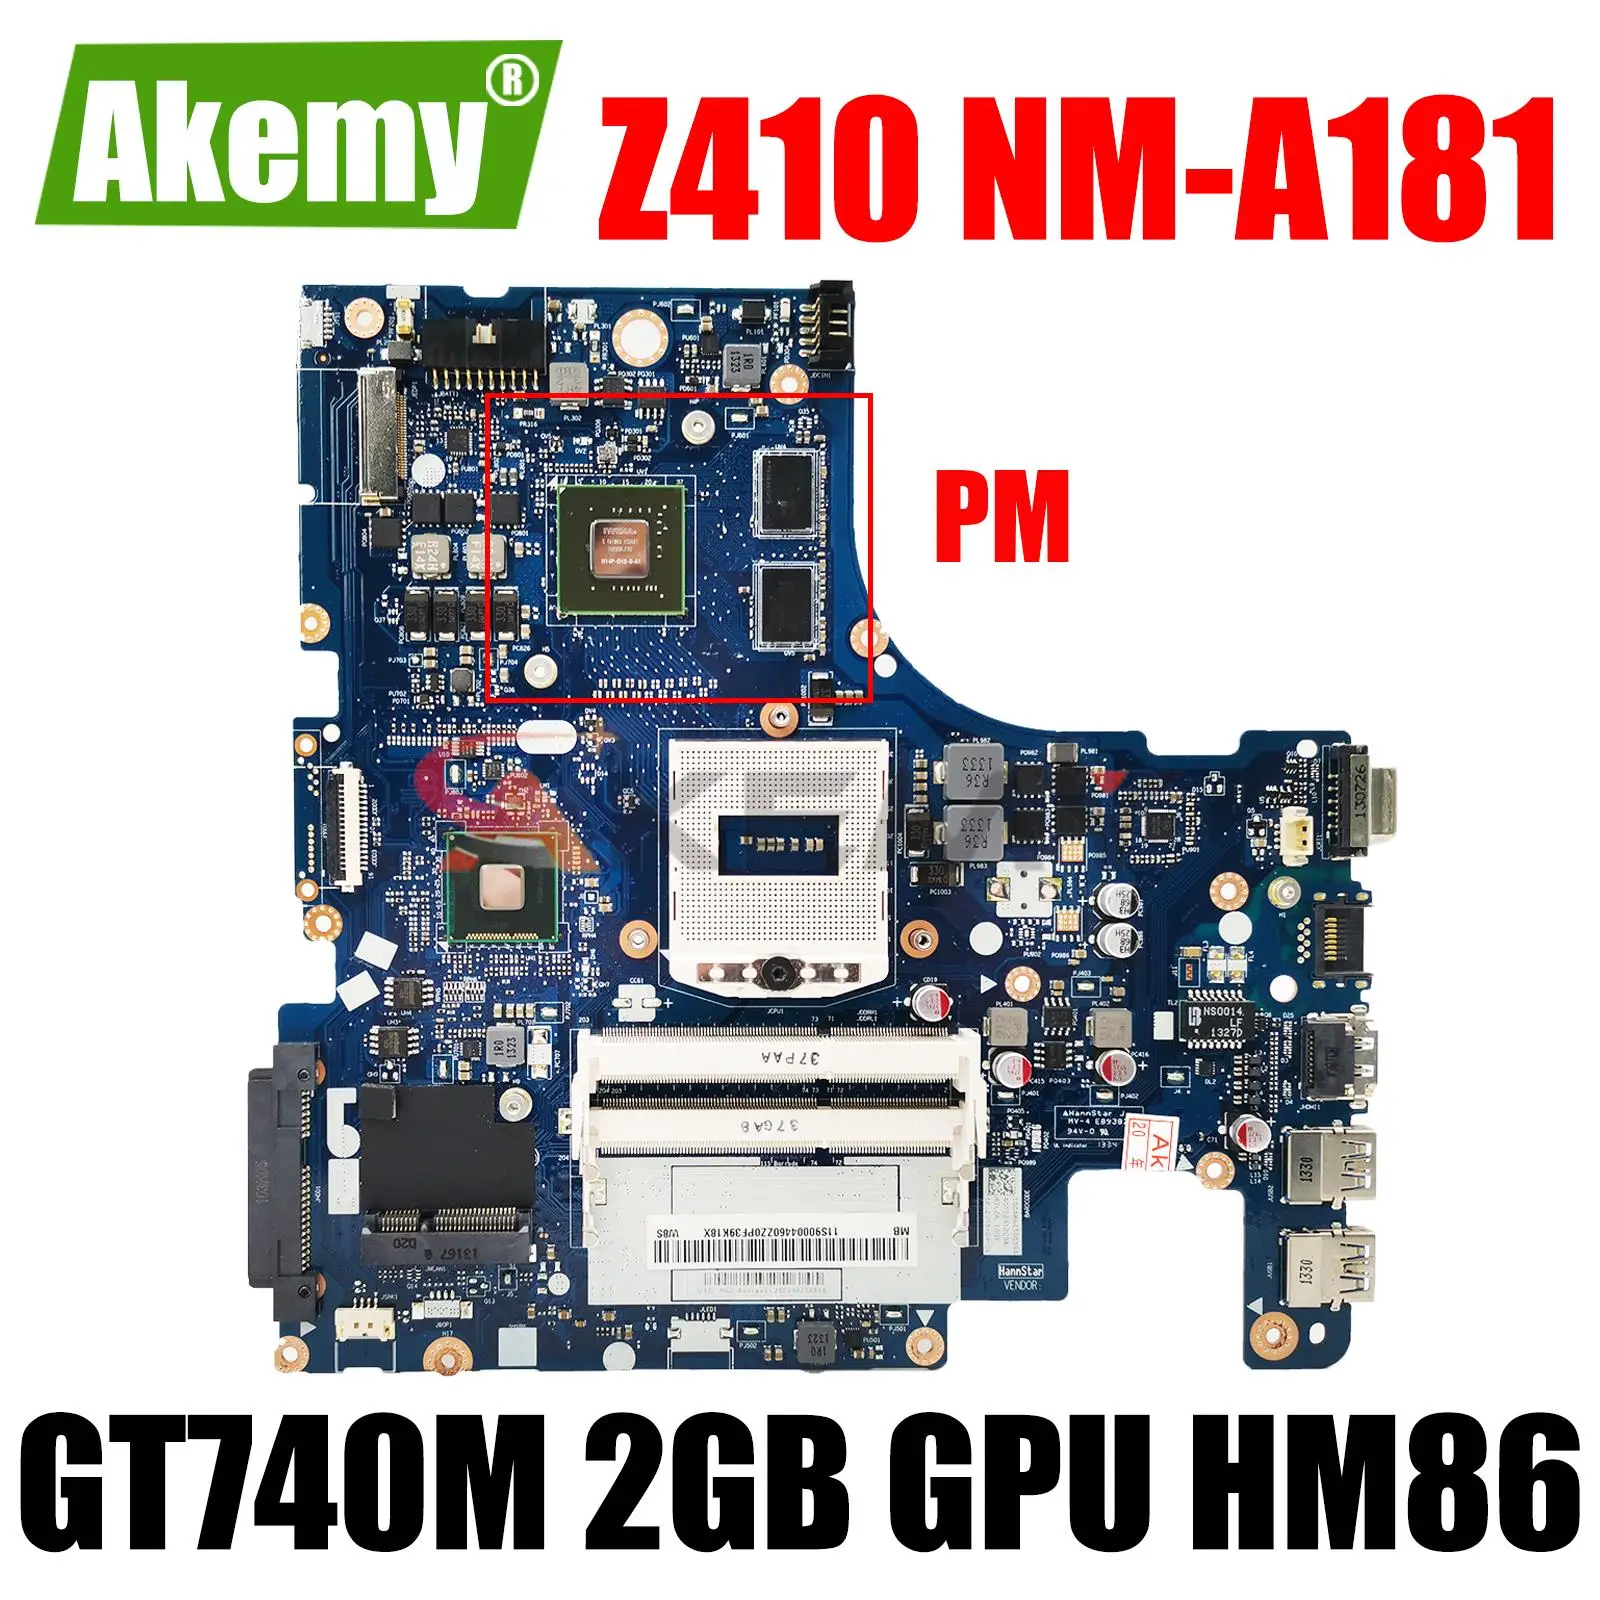 

Original For Lenovo Z410 Laptop Motherboard With GT740M 2GB GPU HM86 DDR3 AILZA NM-A181 100% Tested Free Shipping